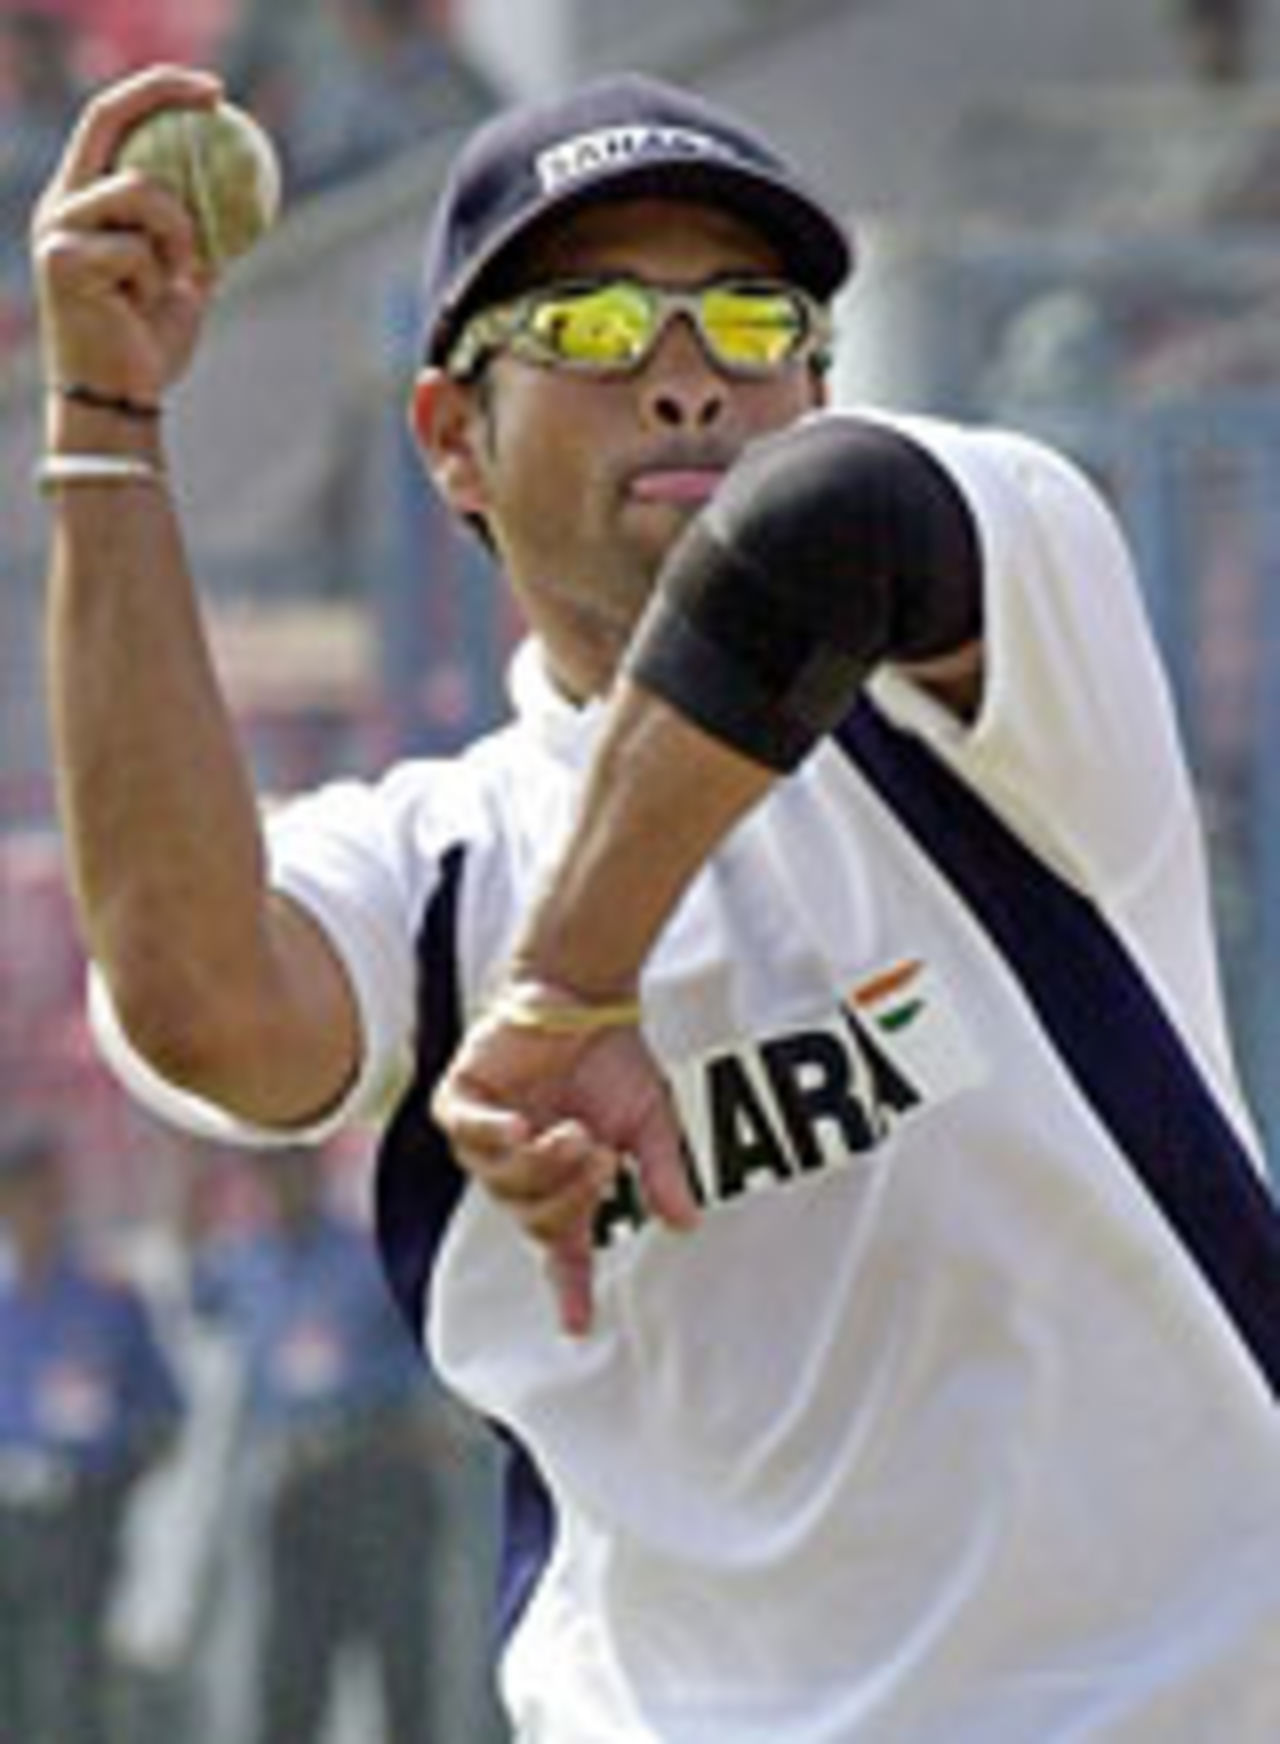 Sachin Tendulkar bowling with shades on in the nets, Chittagong, December 22 2004